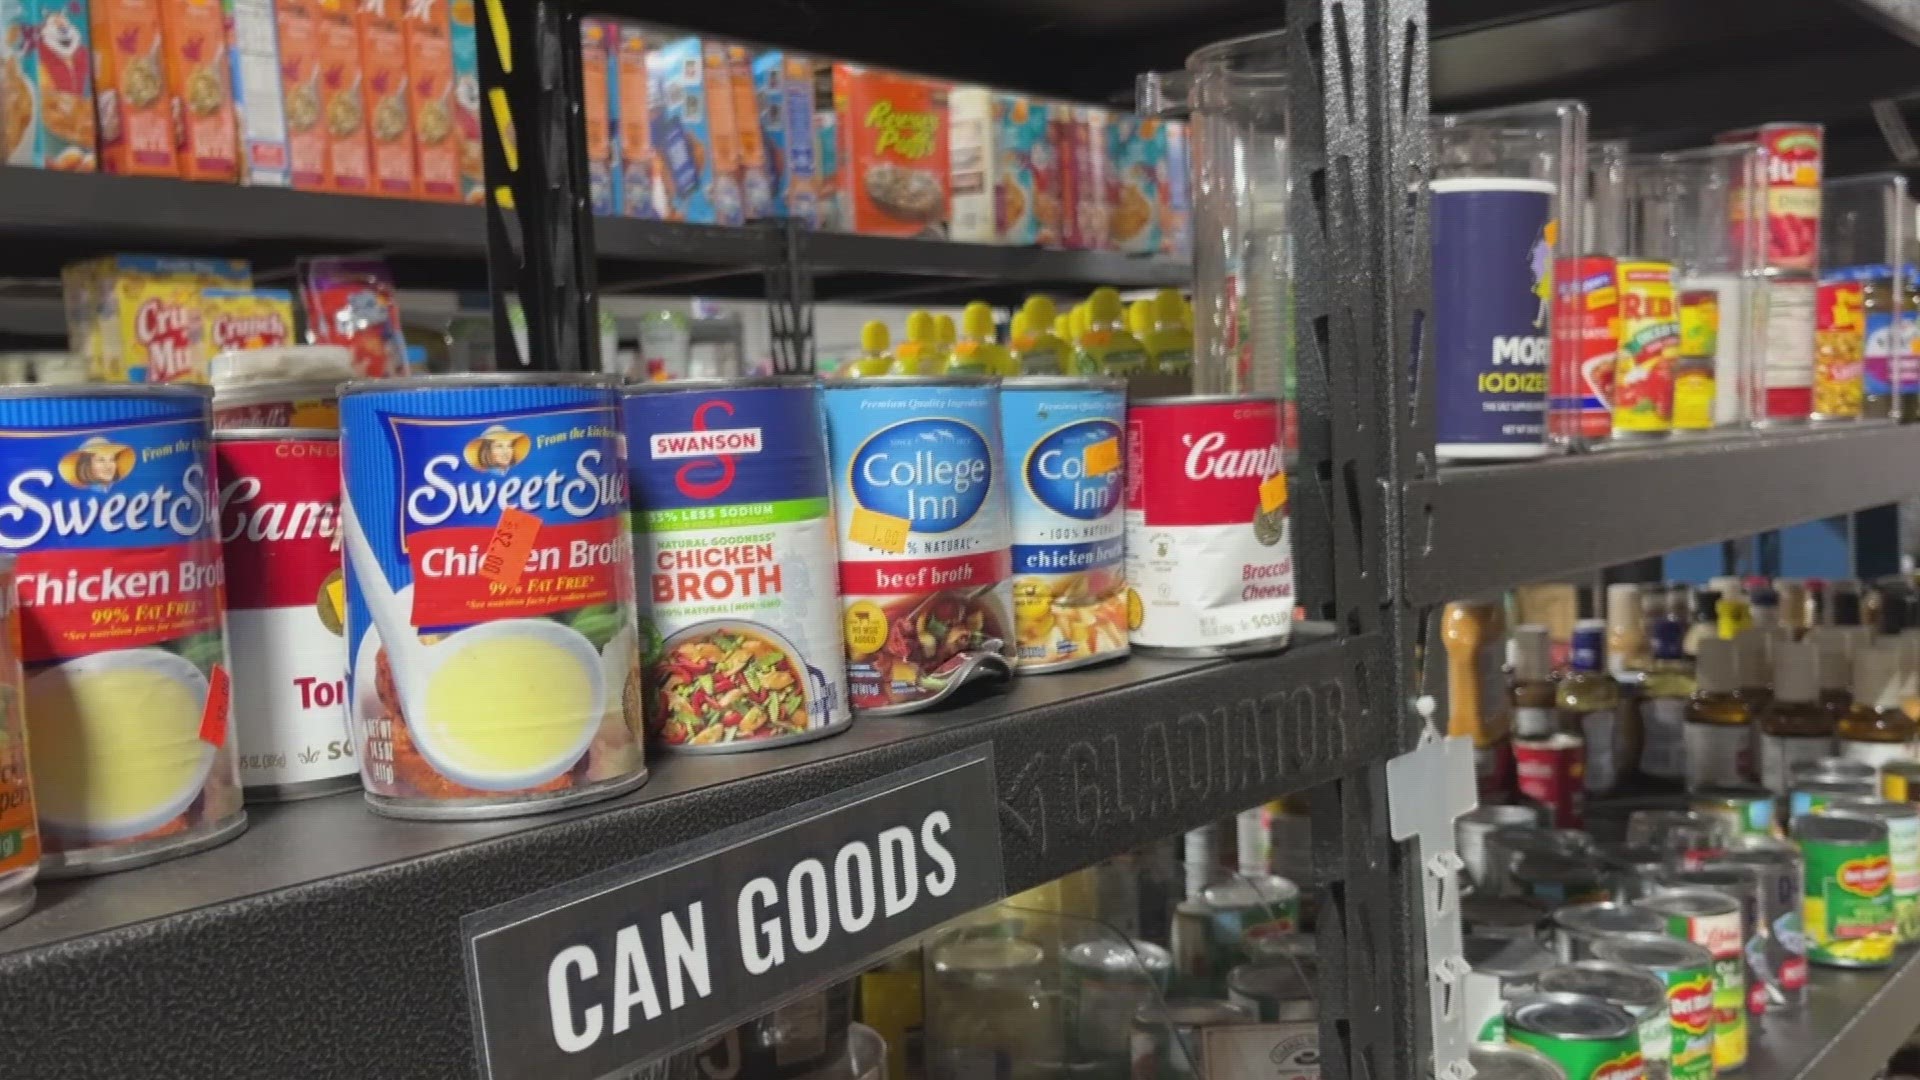 There are places where you can buy food for less money. Those places include liquidators and salvage markets. Allison Gormly tells us What's the Deal.